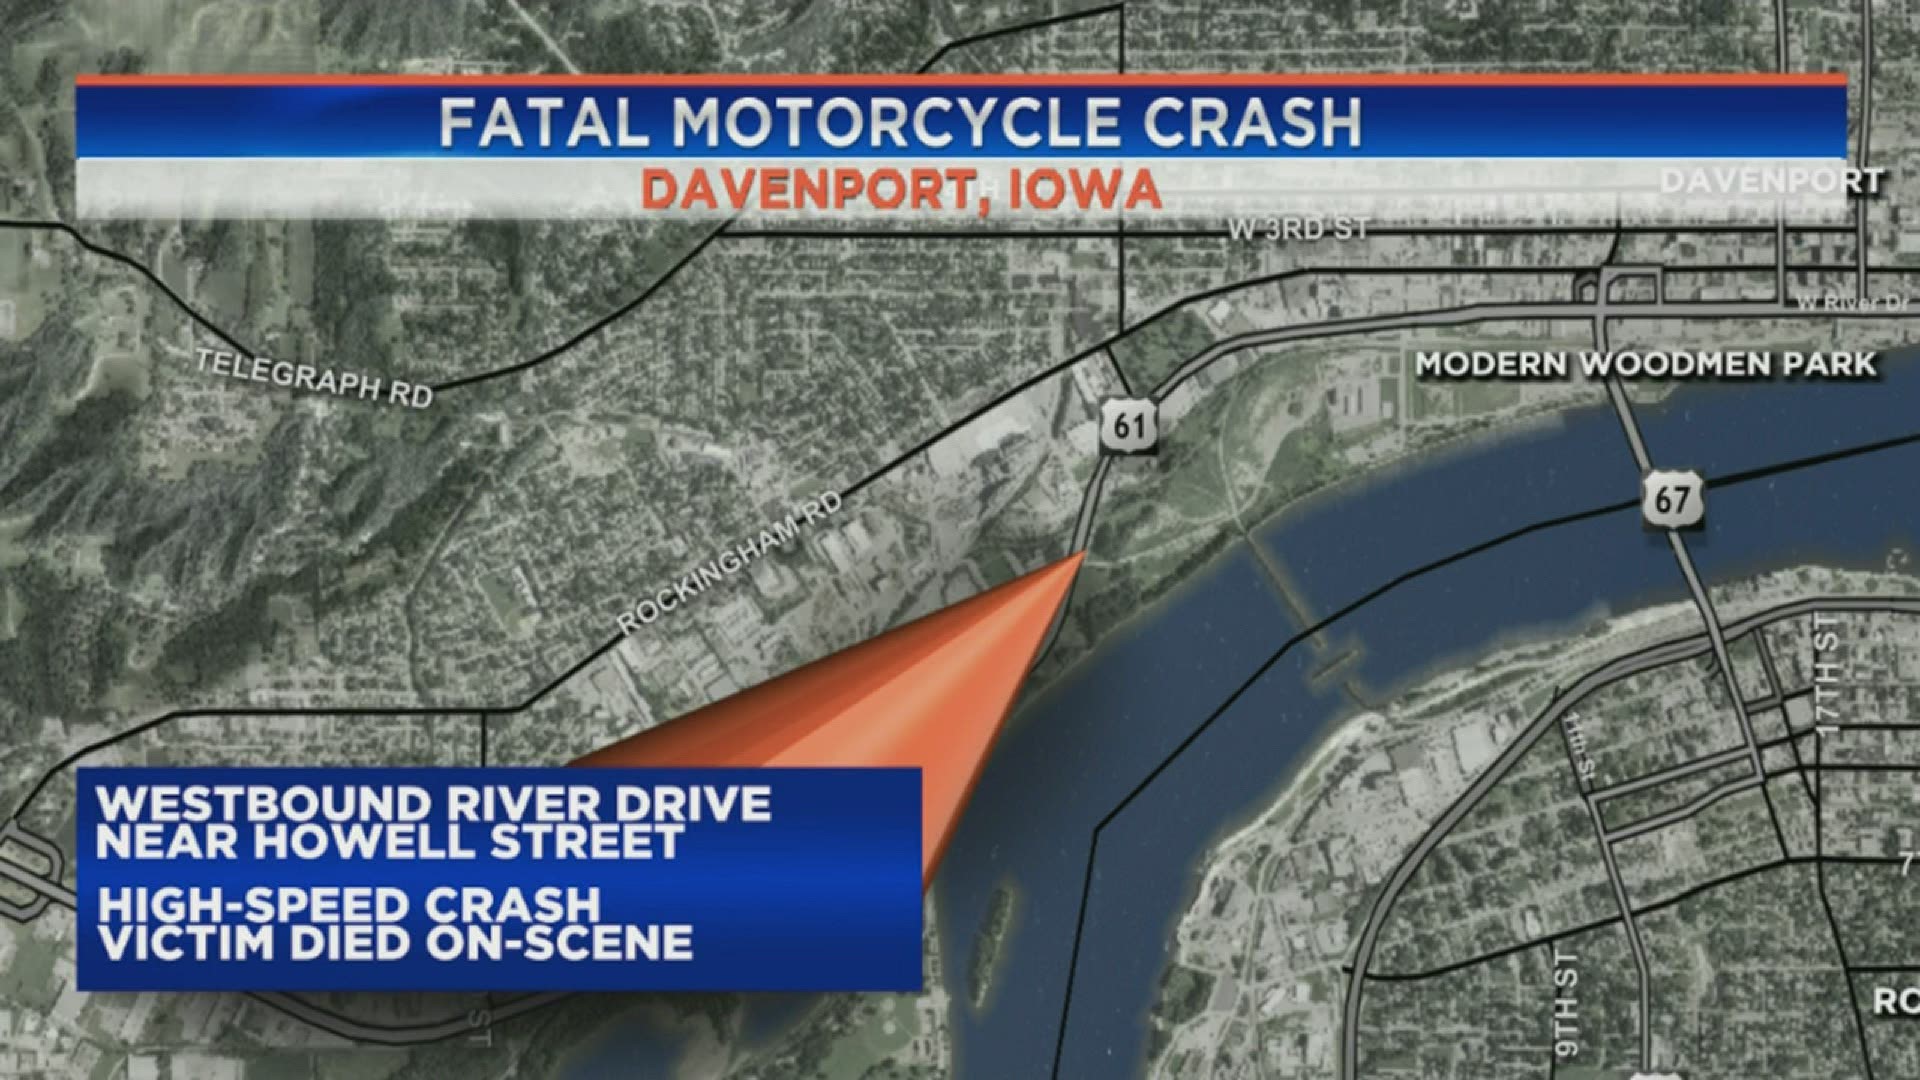 The rider reportedly lost control of the bike and was thrown off at high speeds.